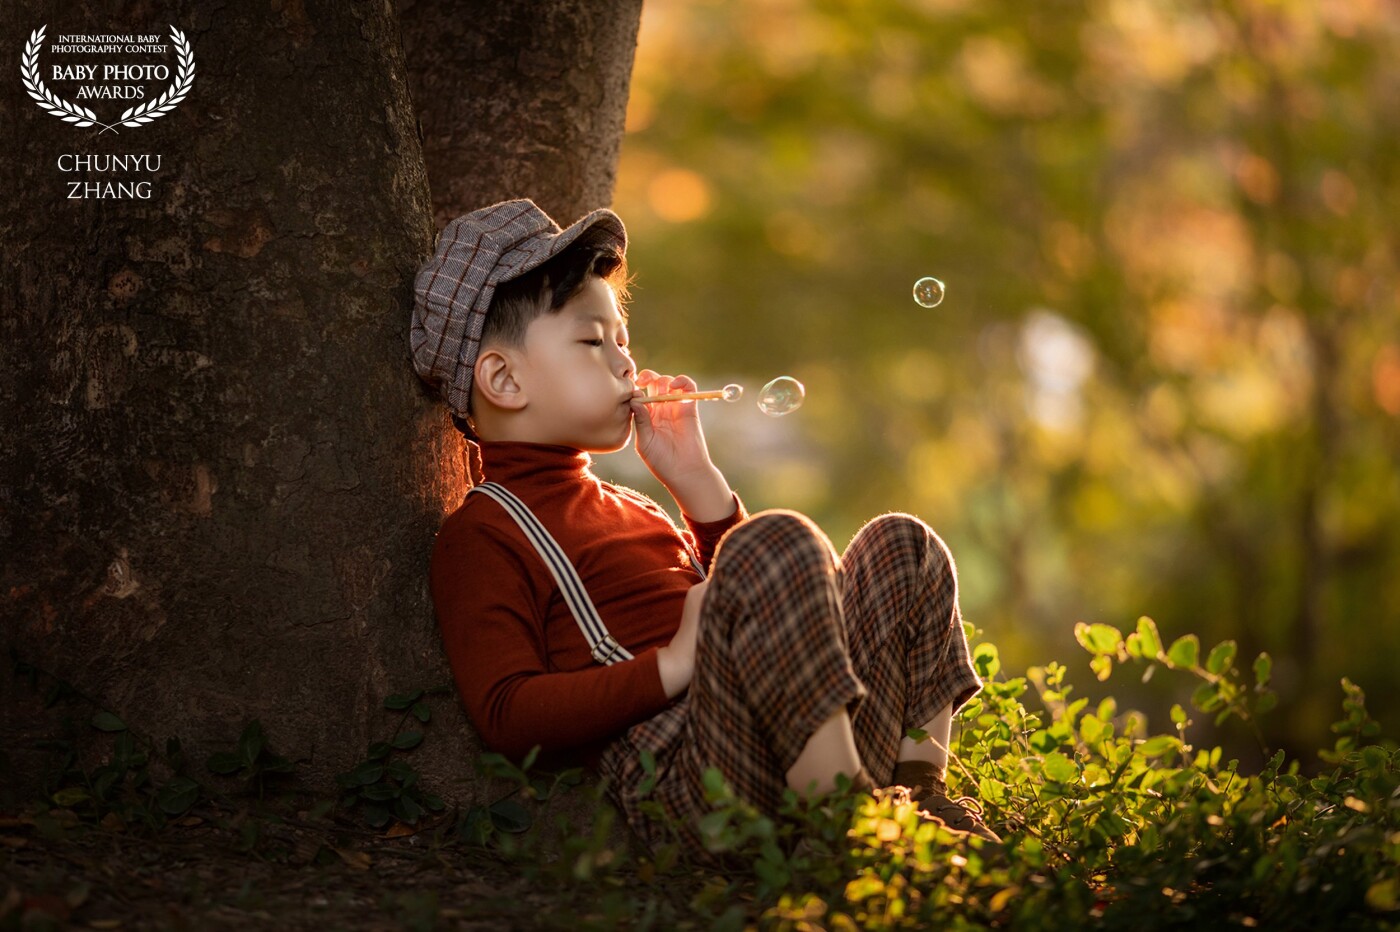 This little boy is playing in the sunset, he is leaning against a big tree. He is blowing bubbles. He really enjoys this good time playing all by himself.